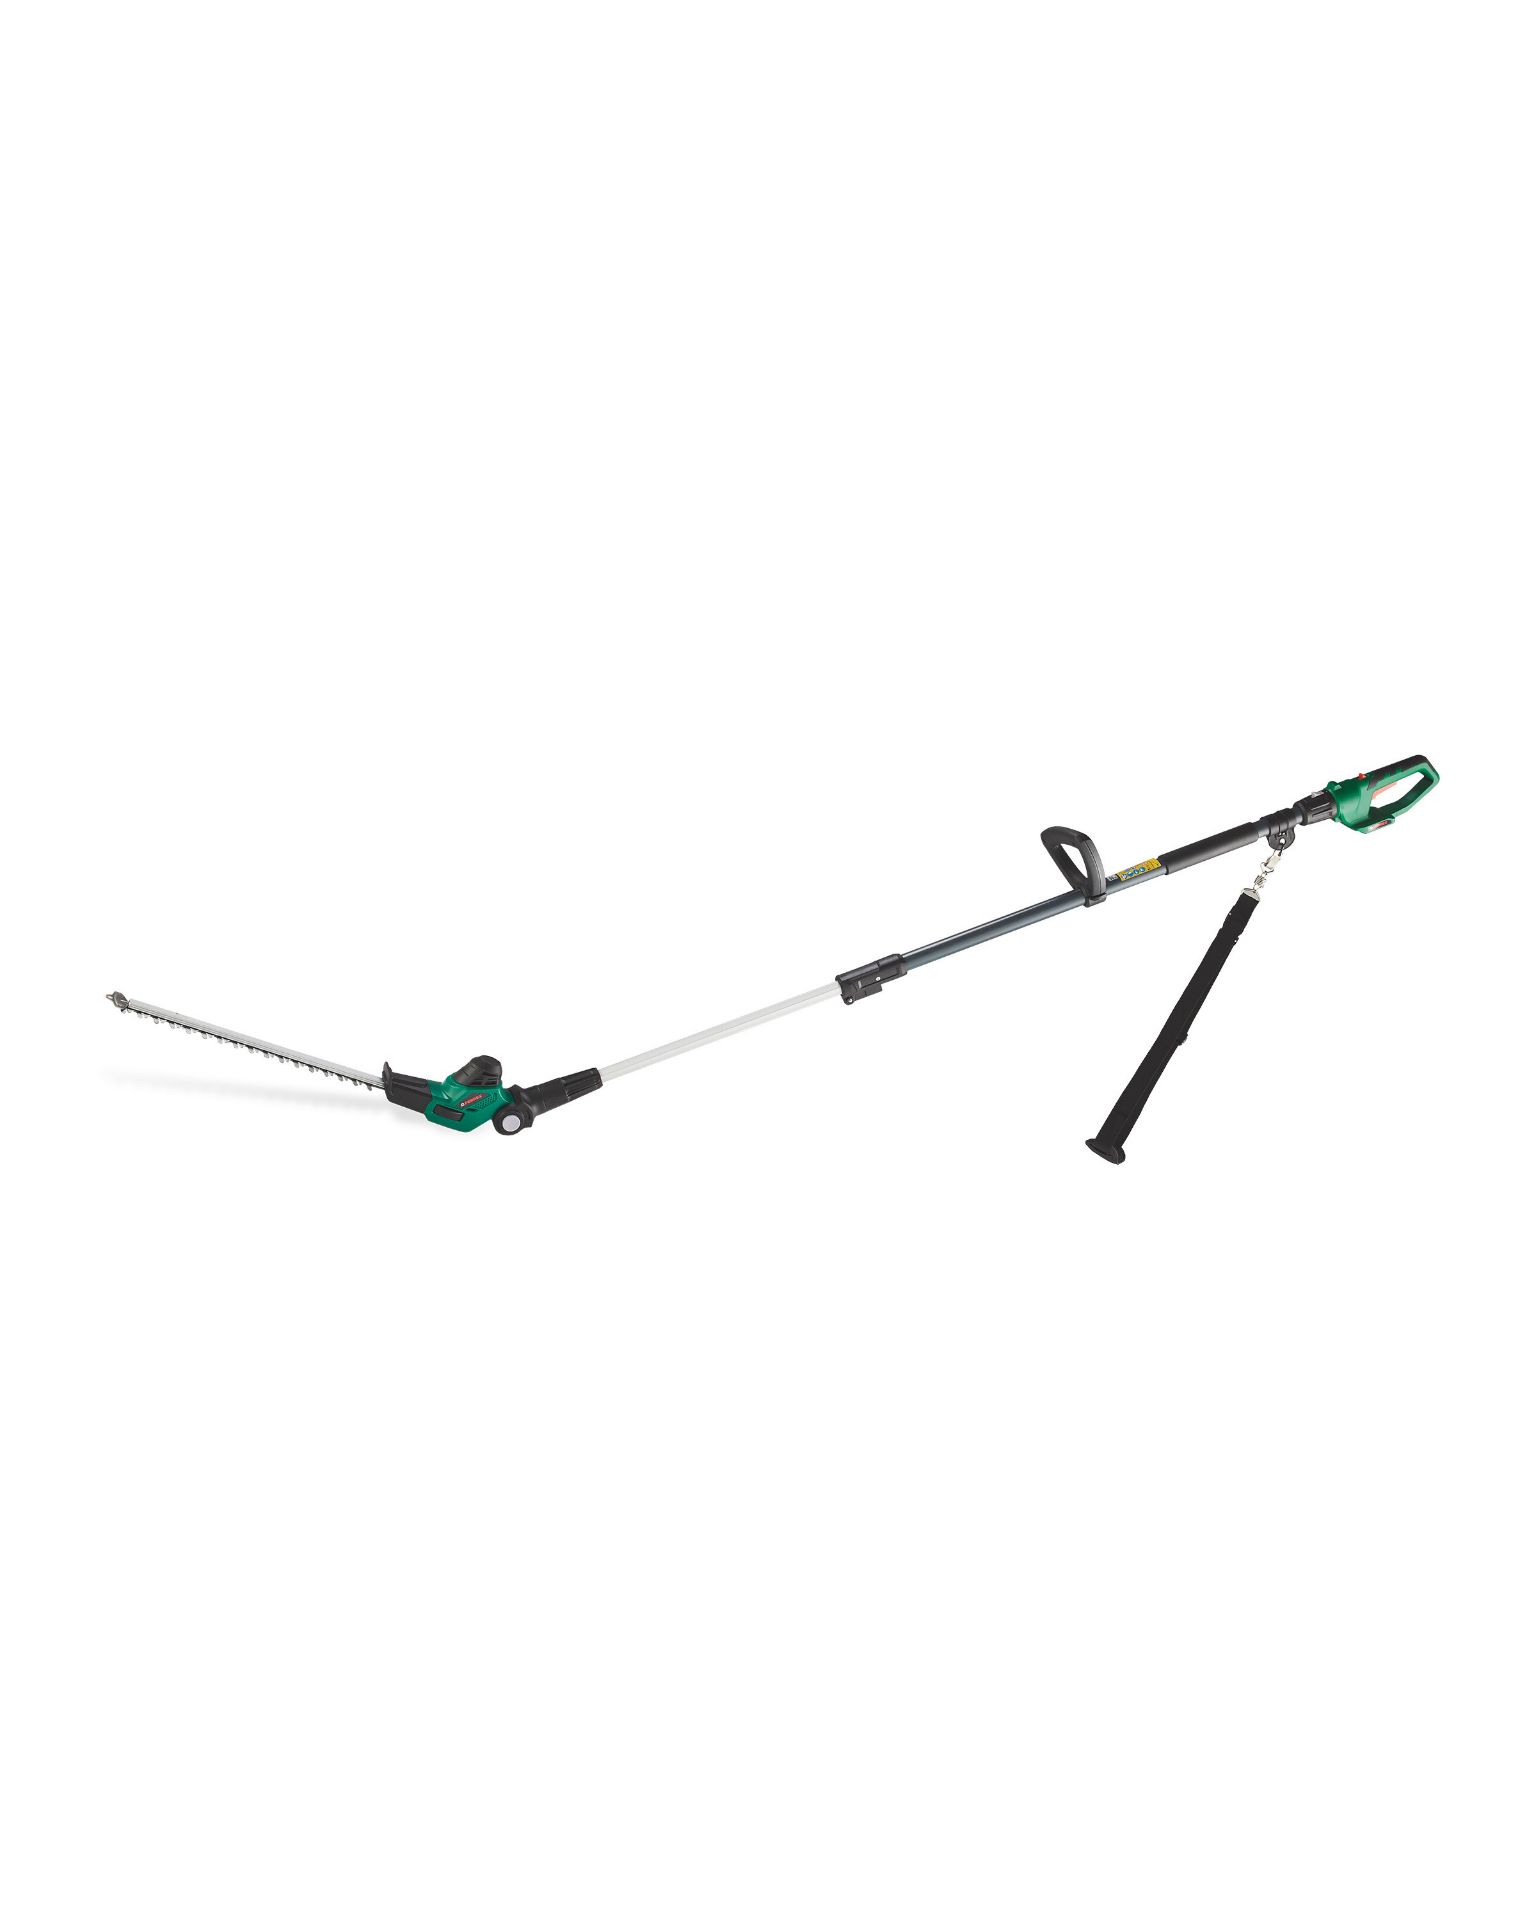 Boxed Ferrex 40V Lithium Iron Cordless Hedge Trimmer Telescopic RRP £55 (Public Viewing and